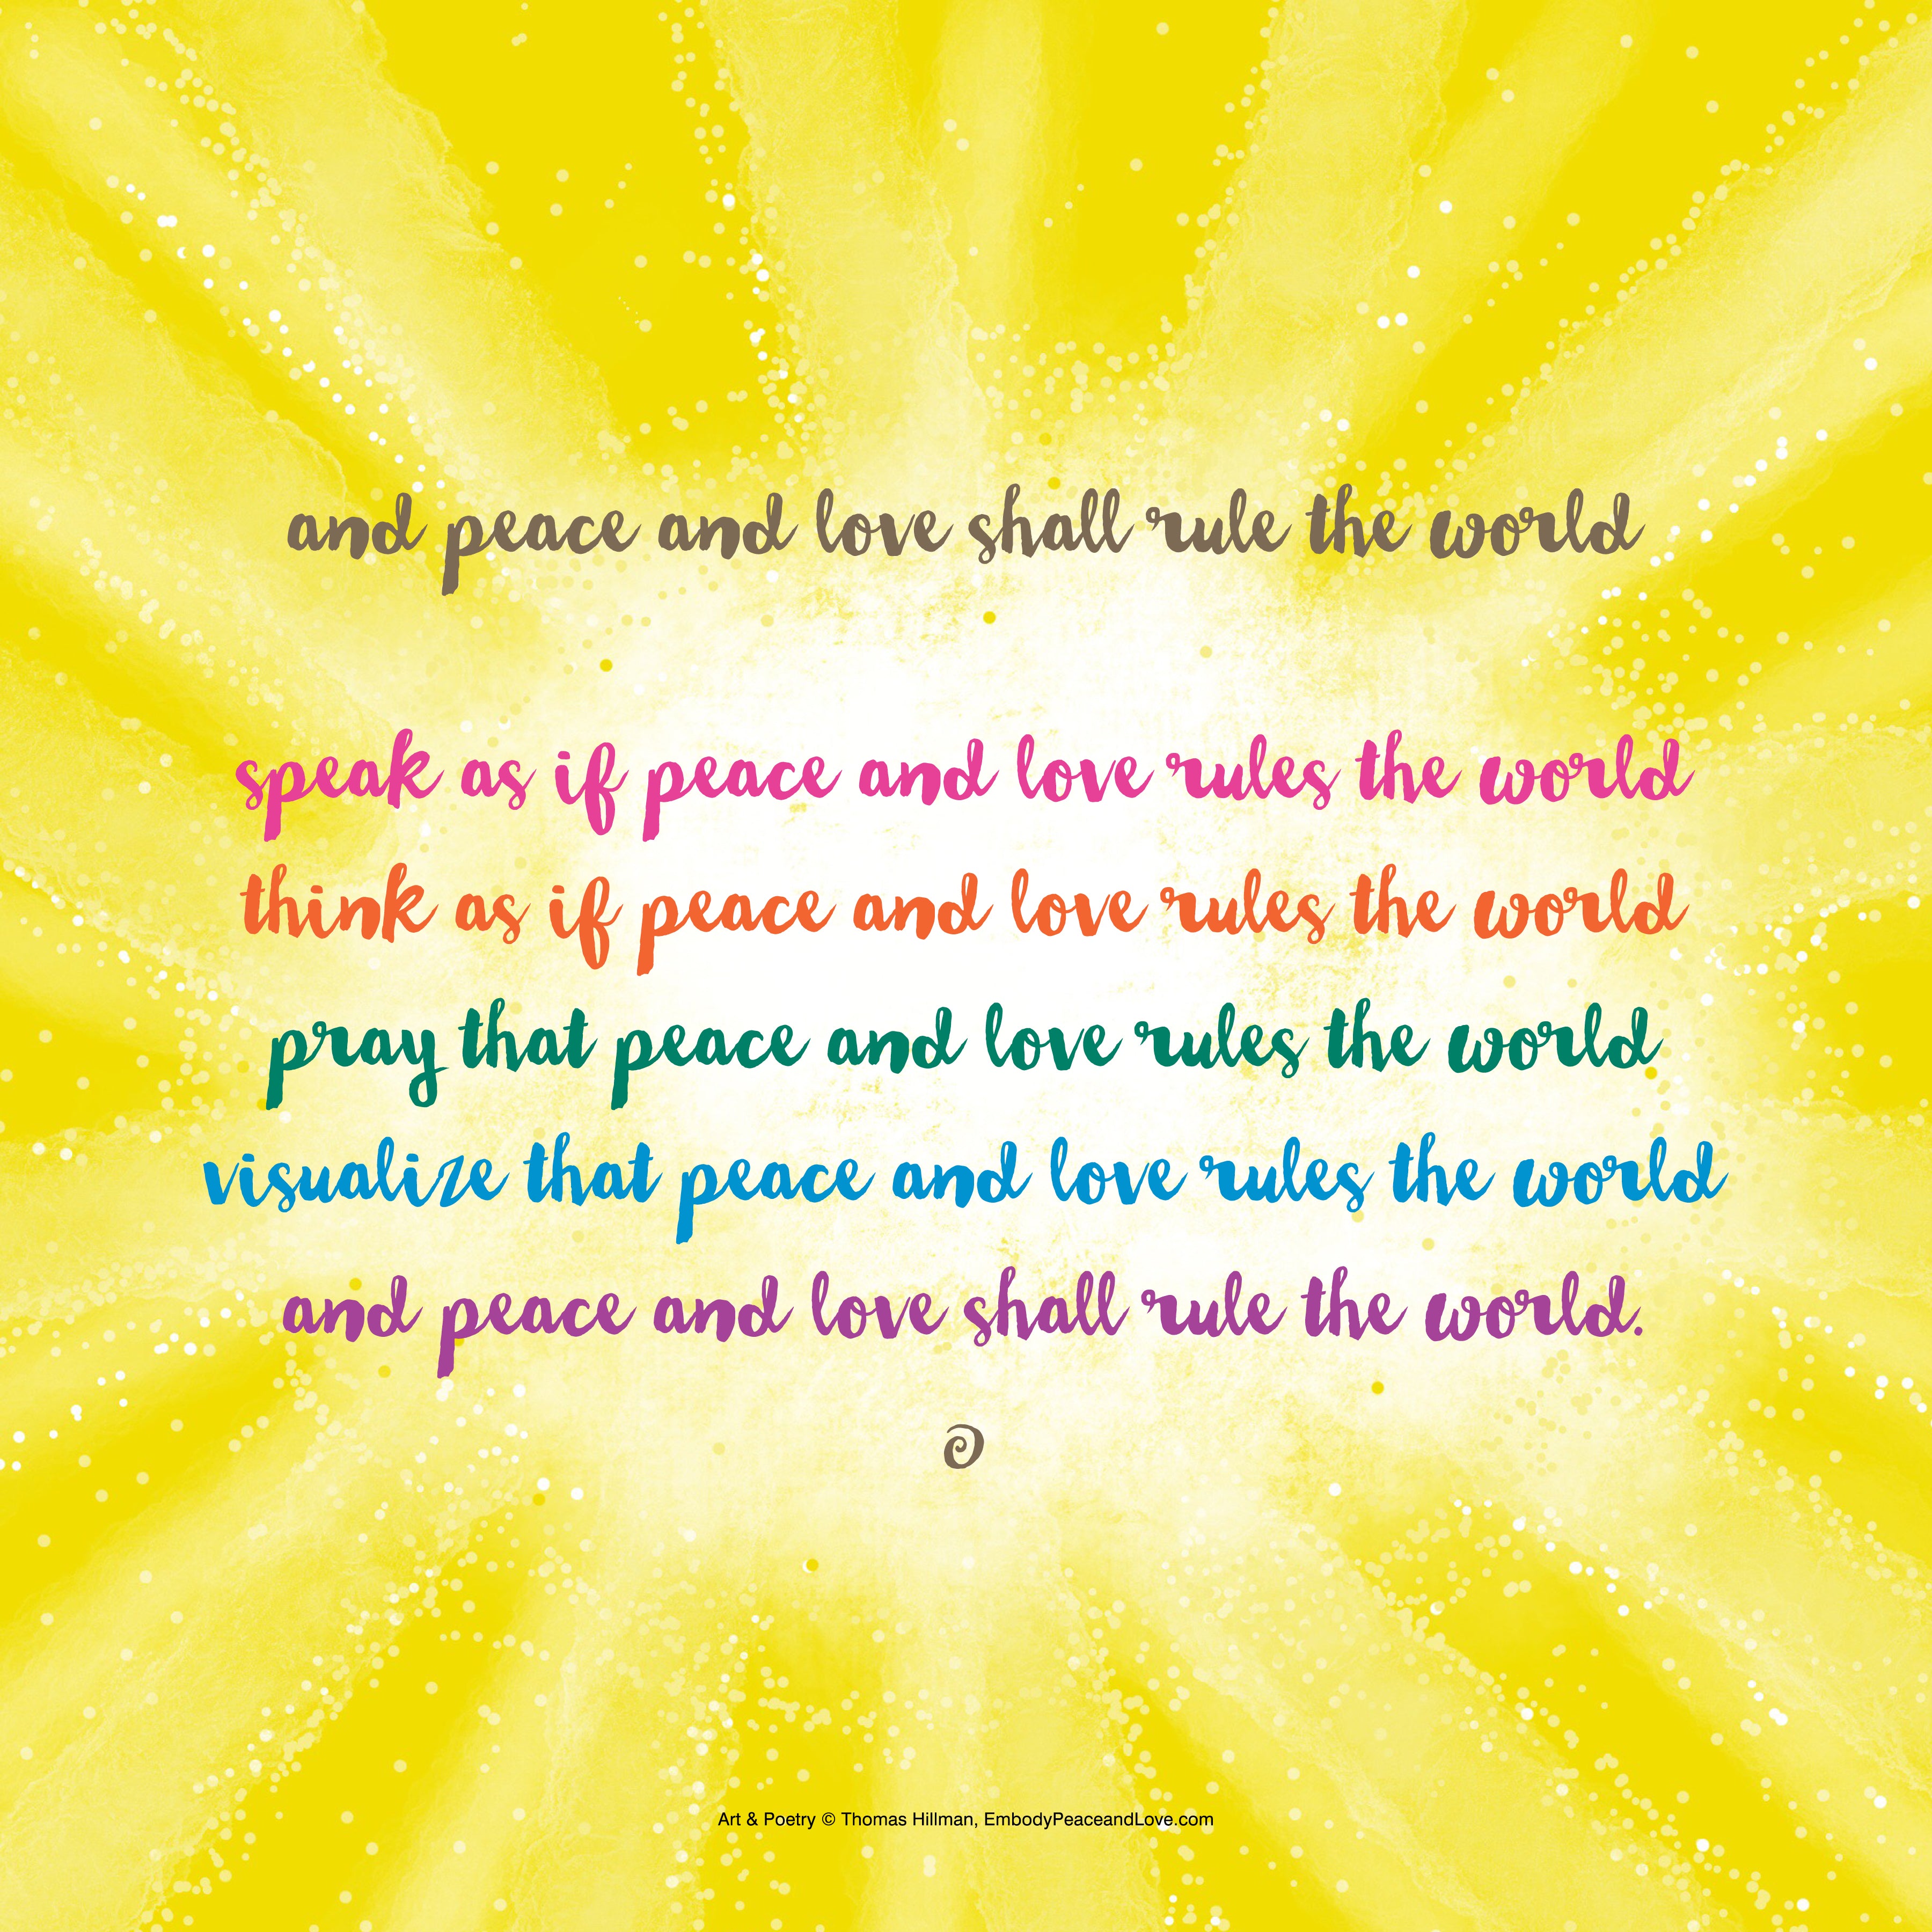 Poster_And peace and love shall rule the world